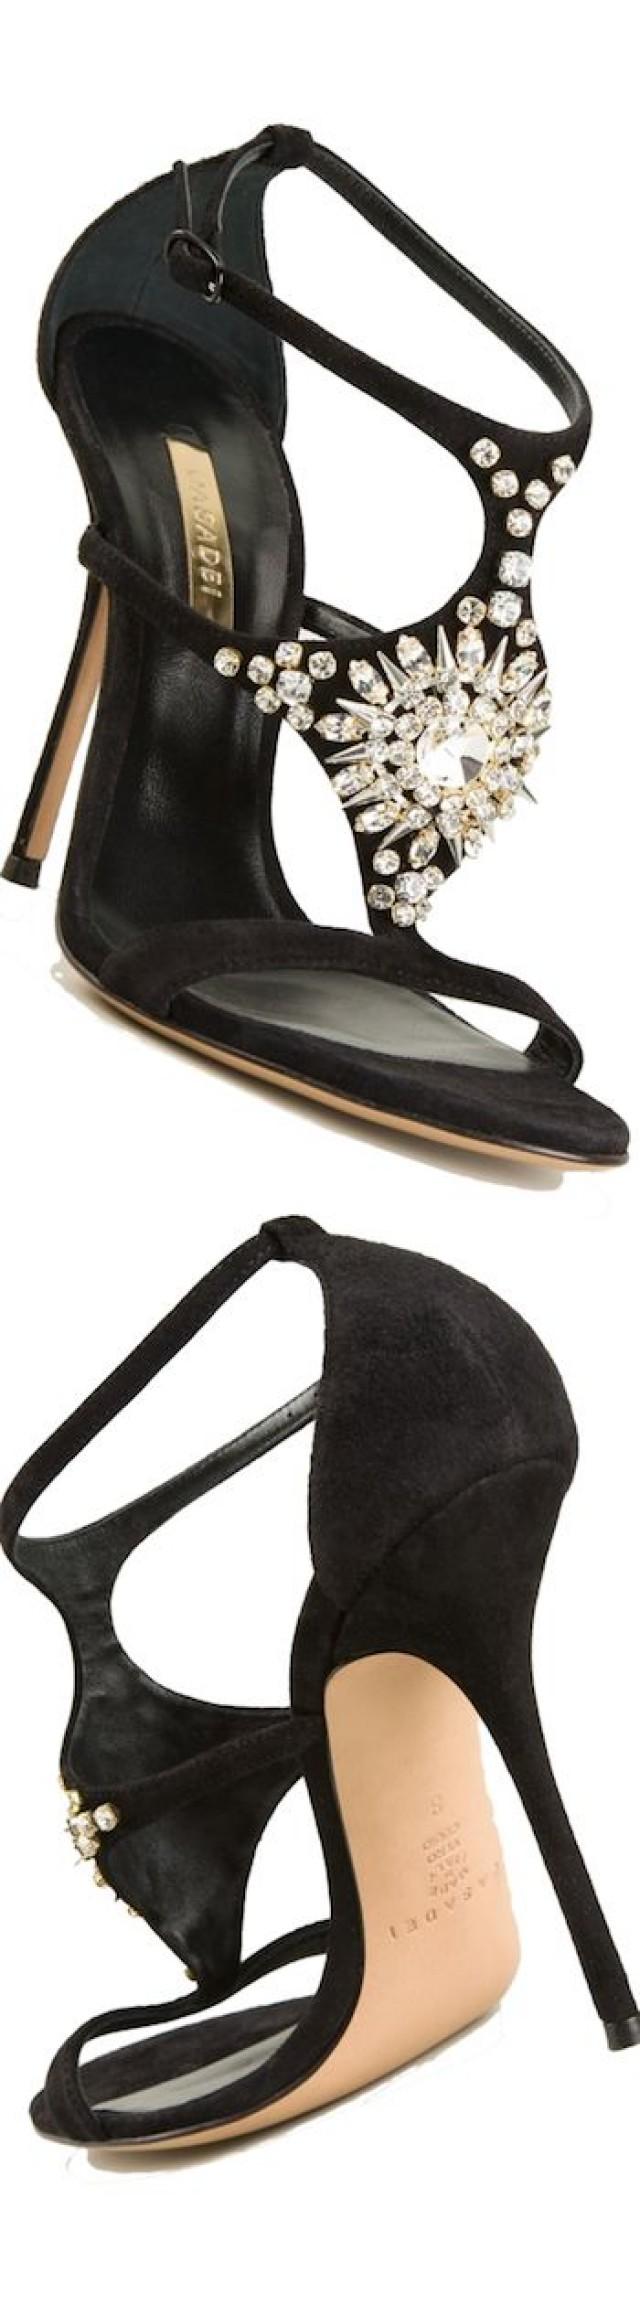 Casadei Step It Up With A Statement-Making Sandal Or Pump! Via LookandlovewithLolo 